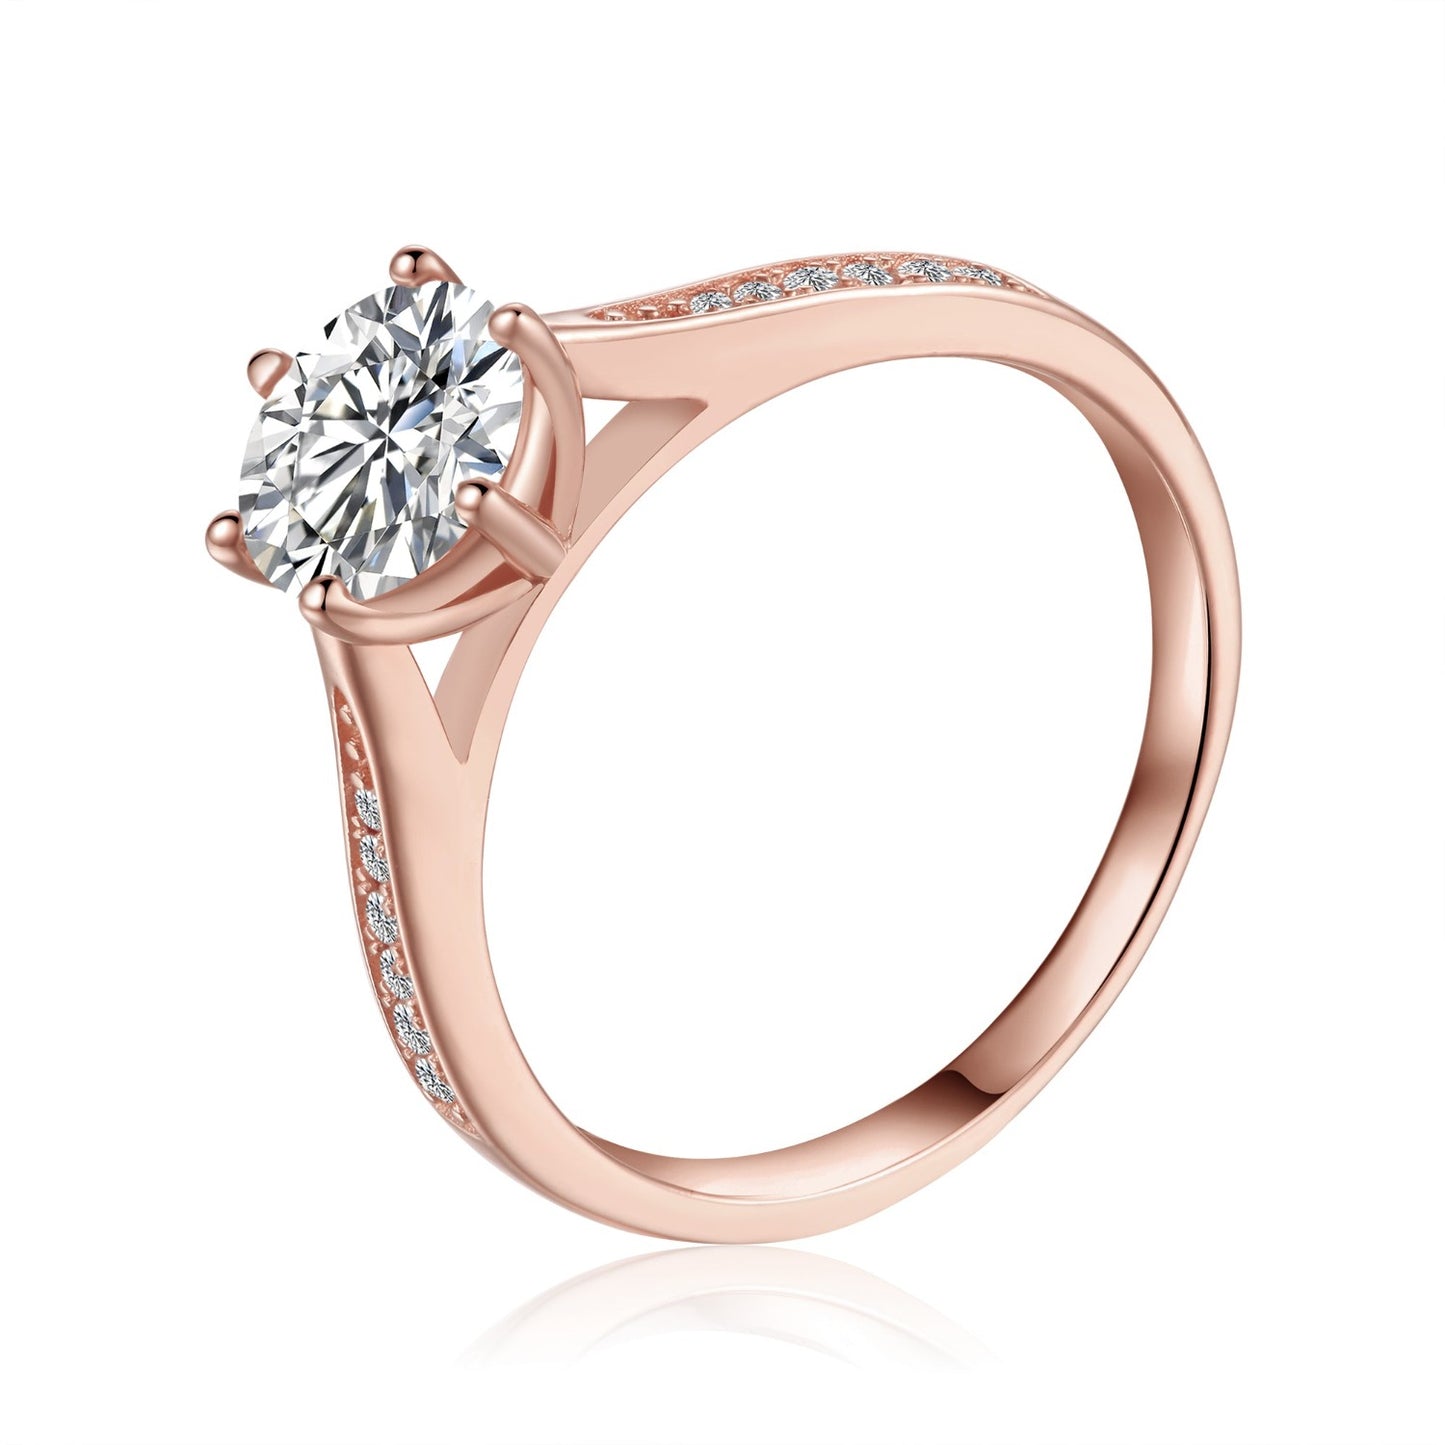 Tapered Pave 1.00ct Moissanite Engagement Ring Set in 9ct Rose Gold